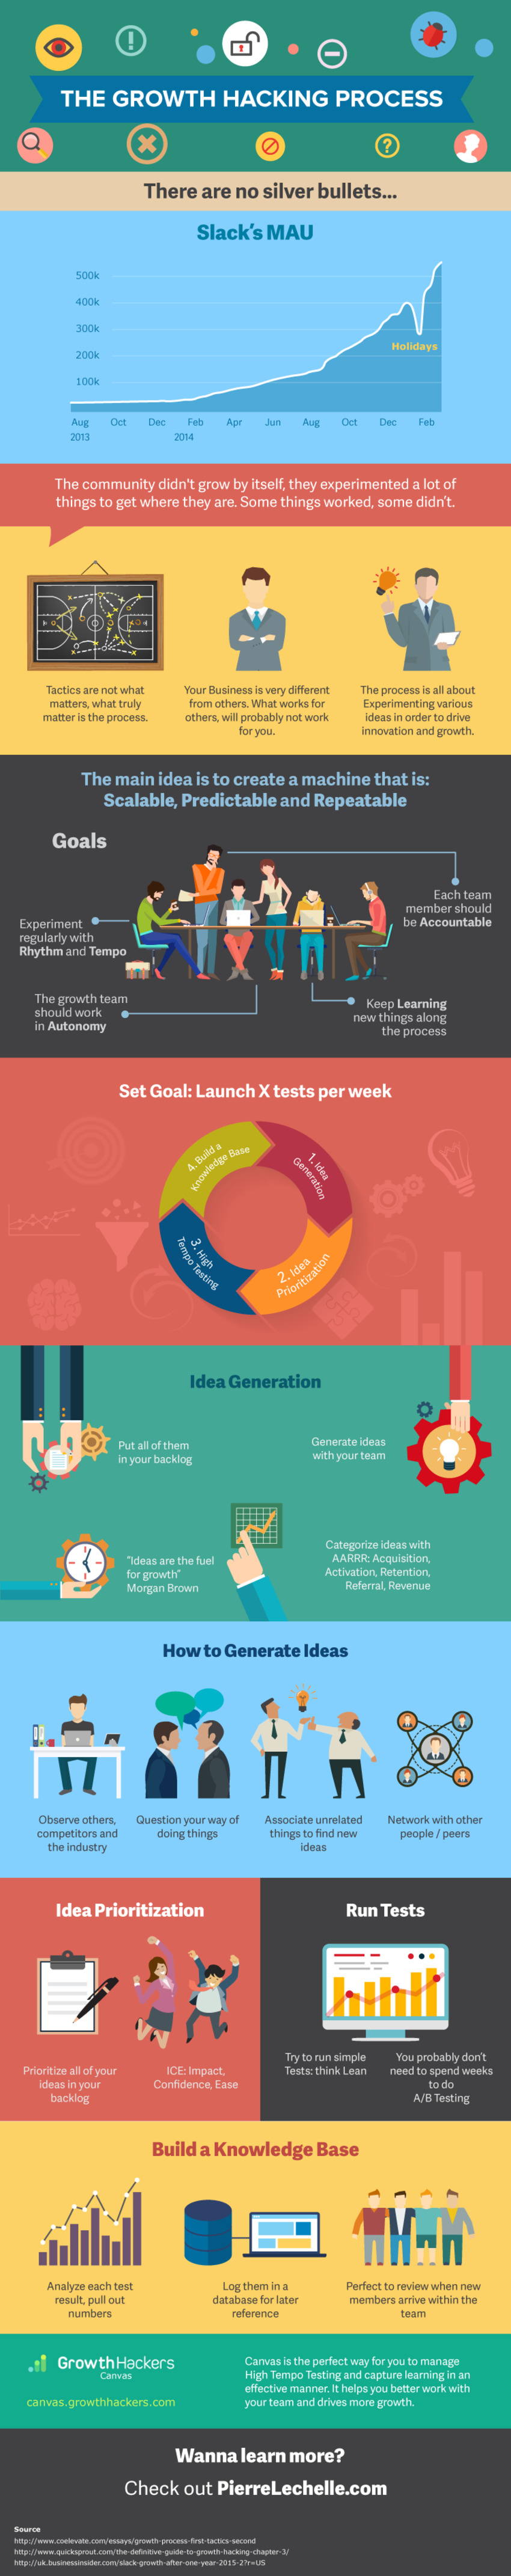 The Growth Hacking Process (an Infographic) - CrazyEgg | The MarTech Digest | Scoop.it